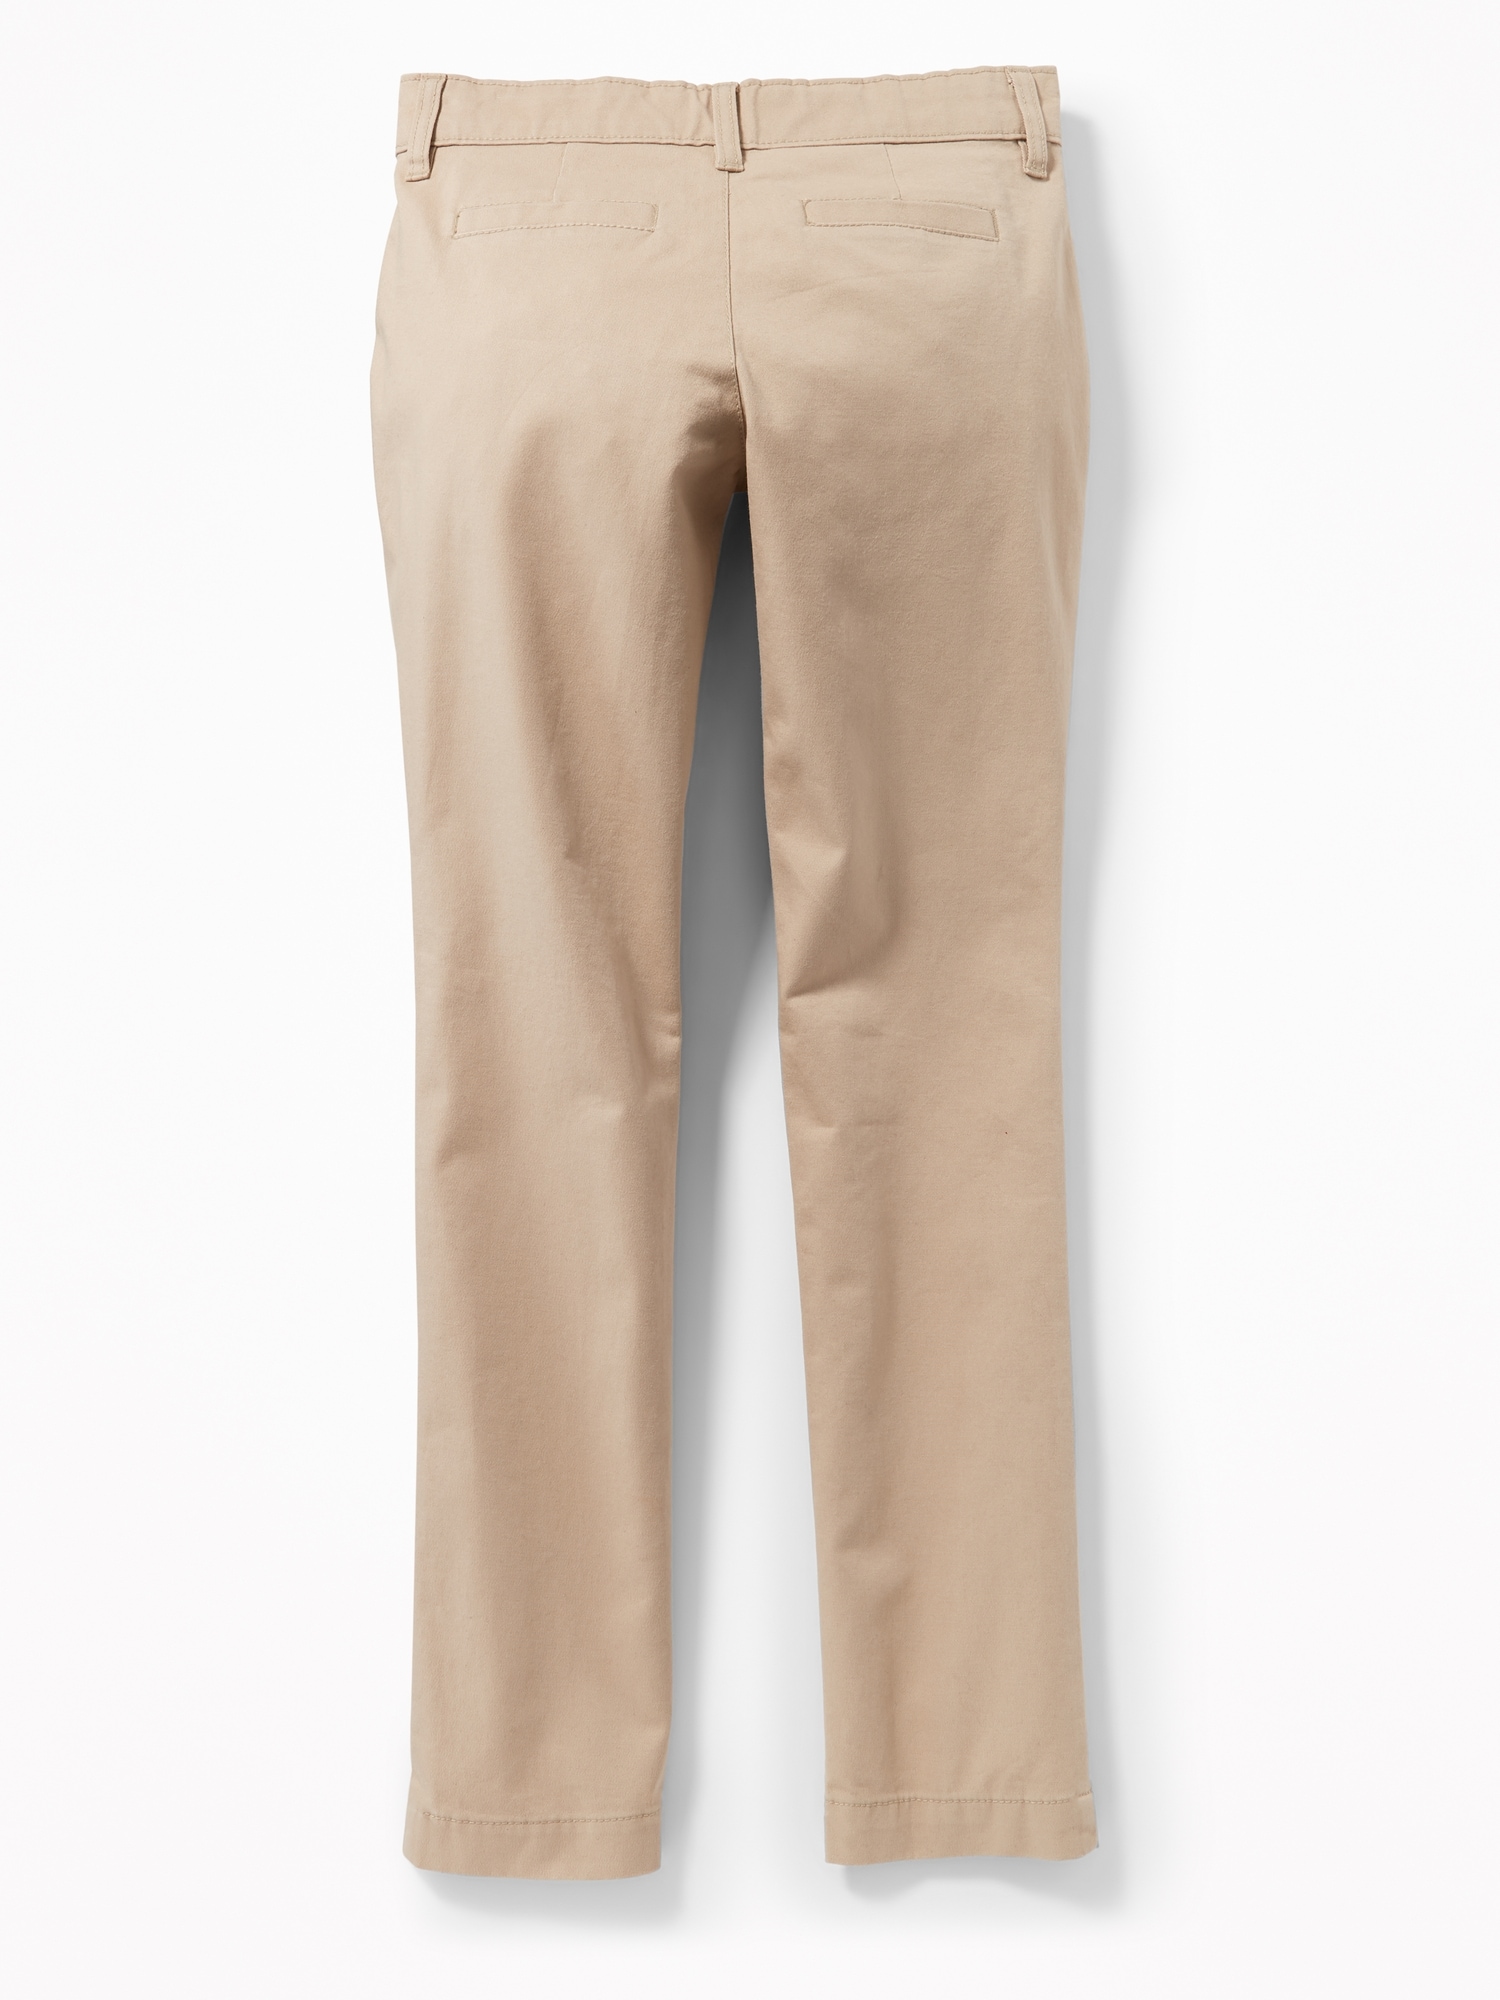 Today Only! Kid's and Women's Old Navy Pants $12-$16 | Includes Uniform  Pants! | Living Rich With Coupons®